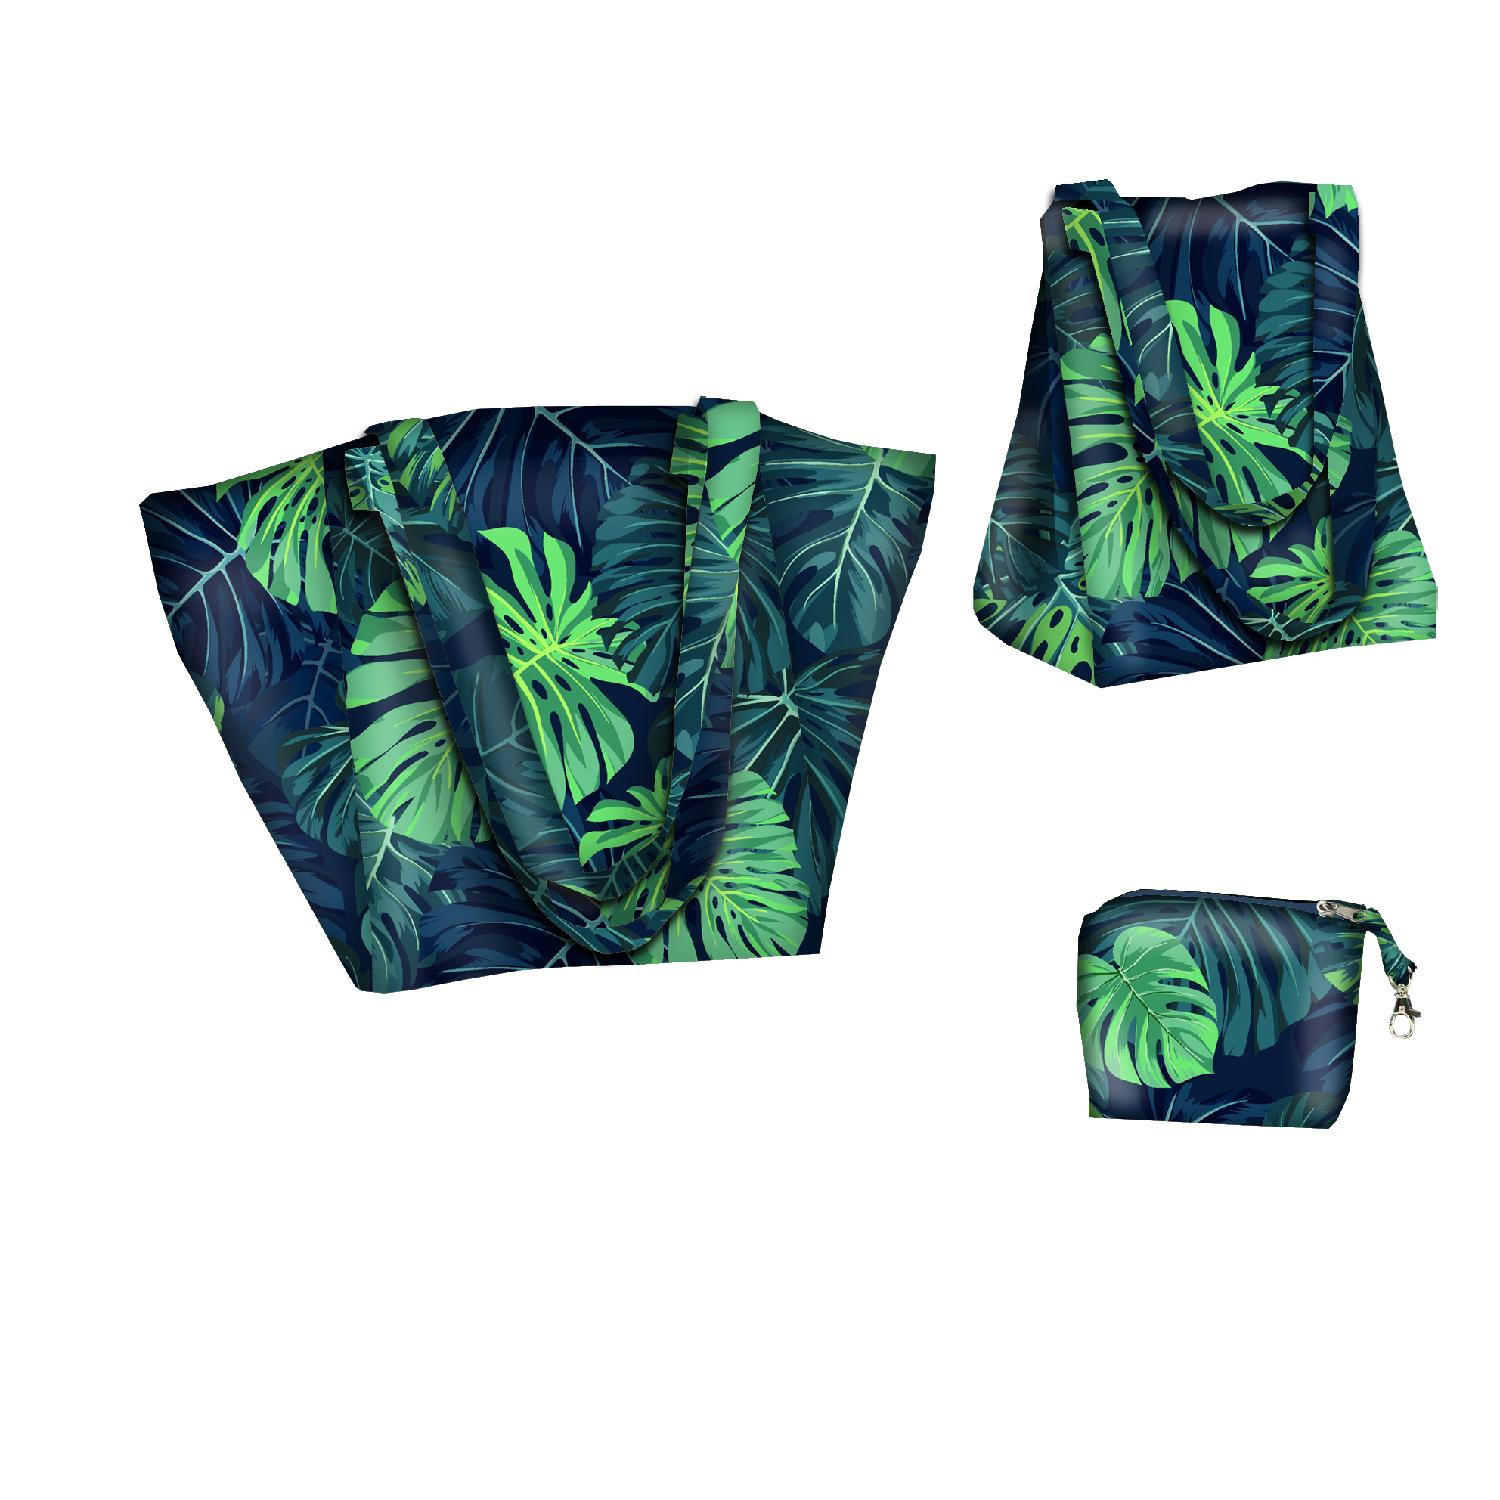 XL bag with in-bag pouch 2 in 1 - MONSTERA 2.0 / navy - sewing set